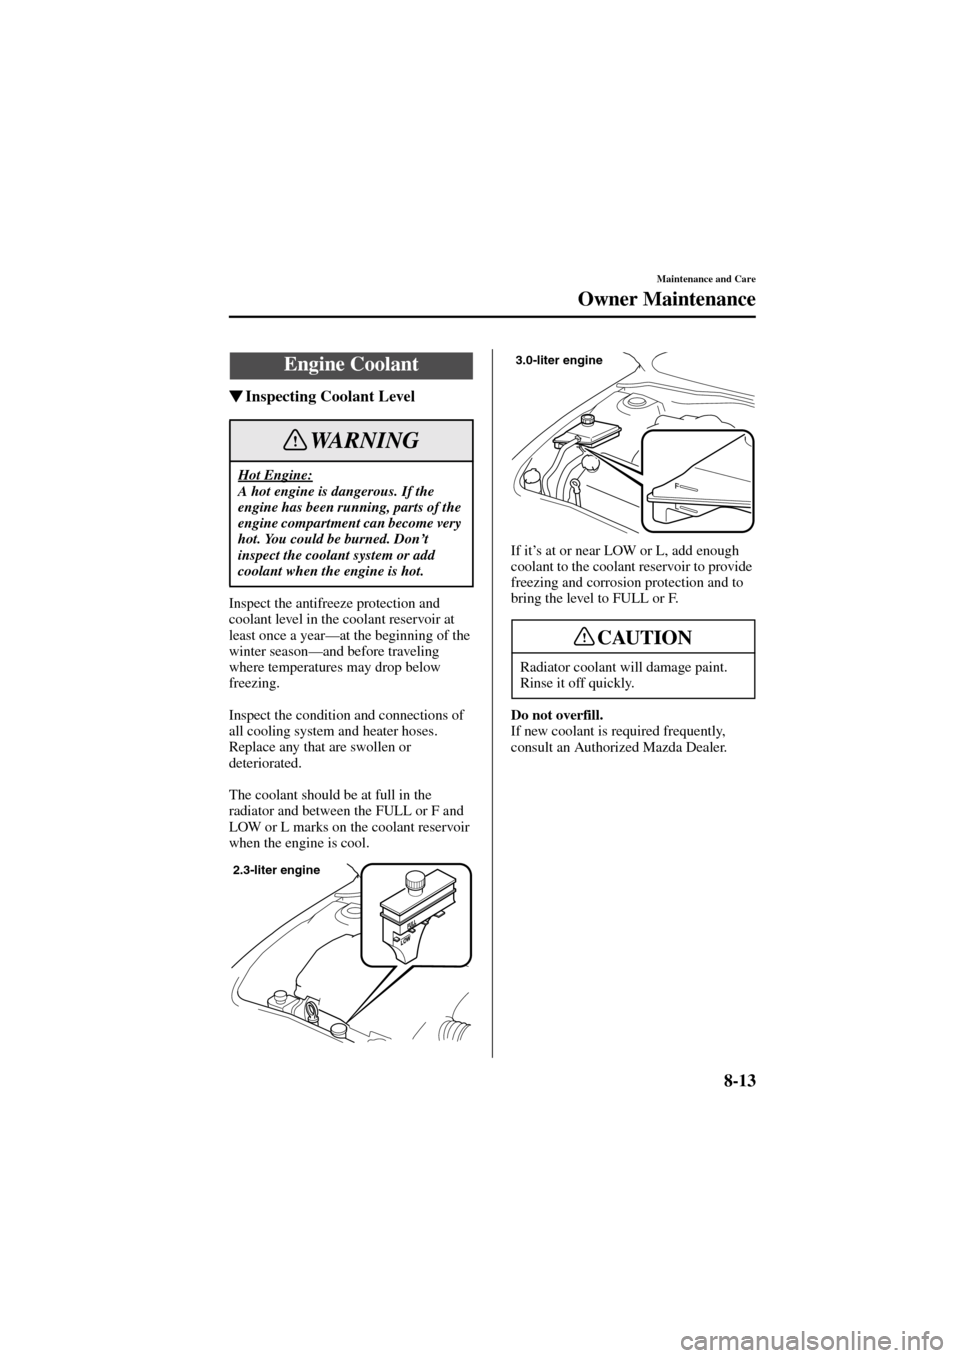 MAZDA MODEL 6 2004  Owners Manual (in English) 8-13
Maintenance and Care
Owner Maintenance
Form No. 8R29-EA-02I
Inspecting Coolant Level
Inspect the antifreeze protection and 
coolant level in the coolant reservoir at 
least once a year—at the 